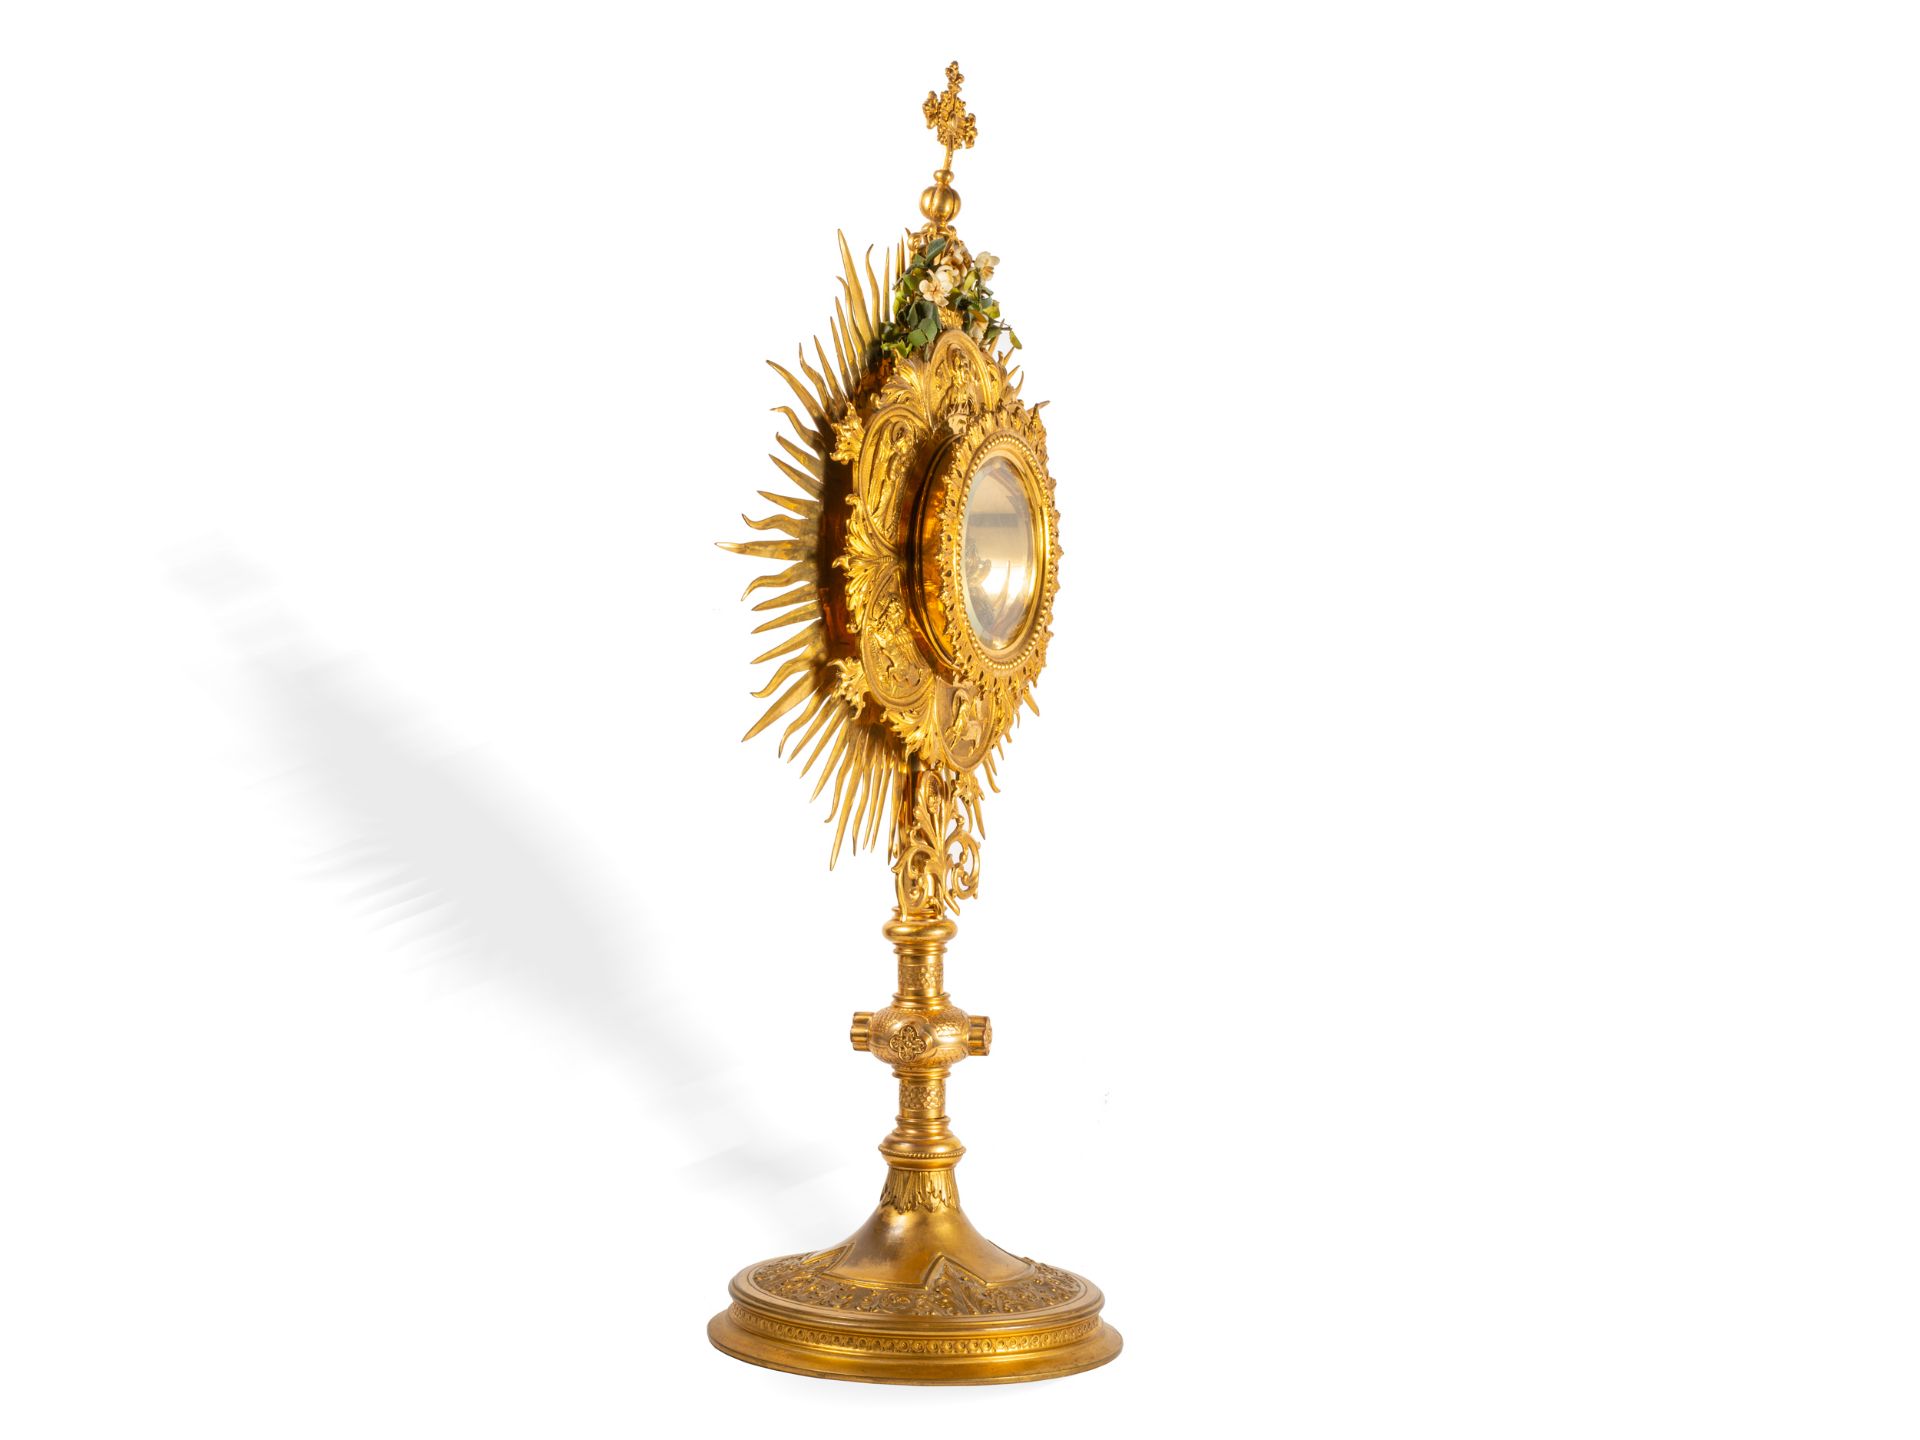 Monstrance, 19th century, Cast brass or bronze, handmolded and engraved - Image 3 of 7